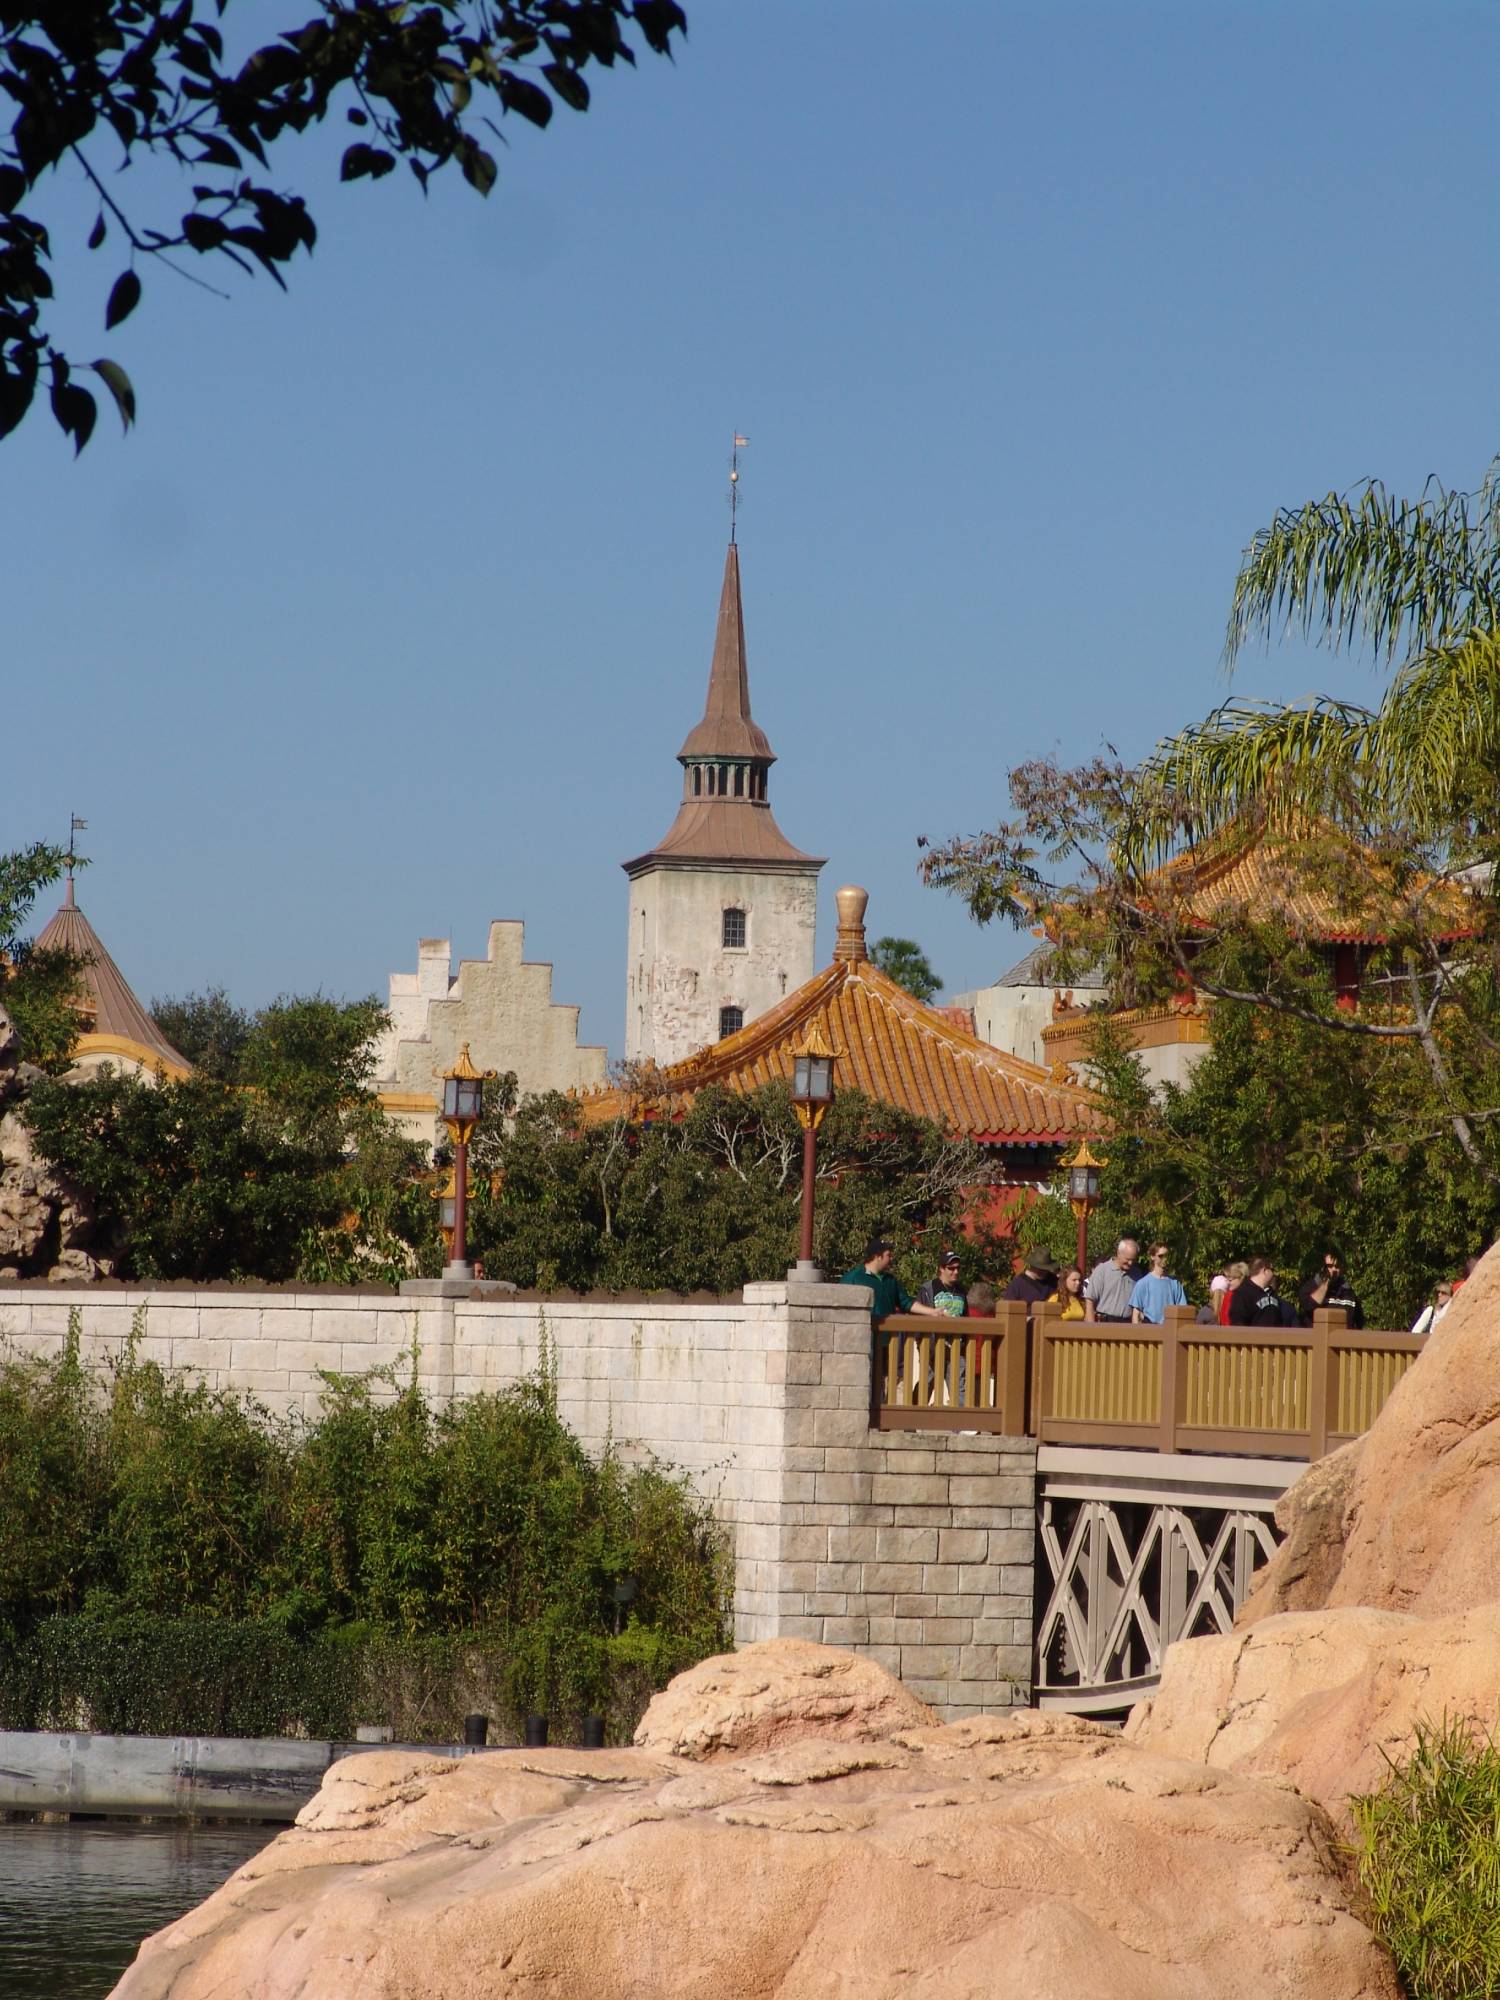 Epcot - Norway and China